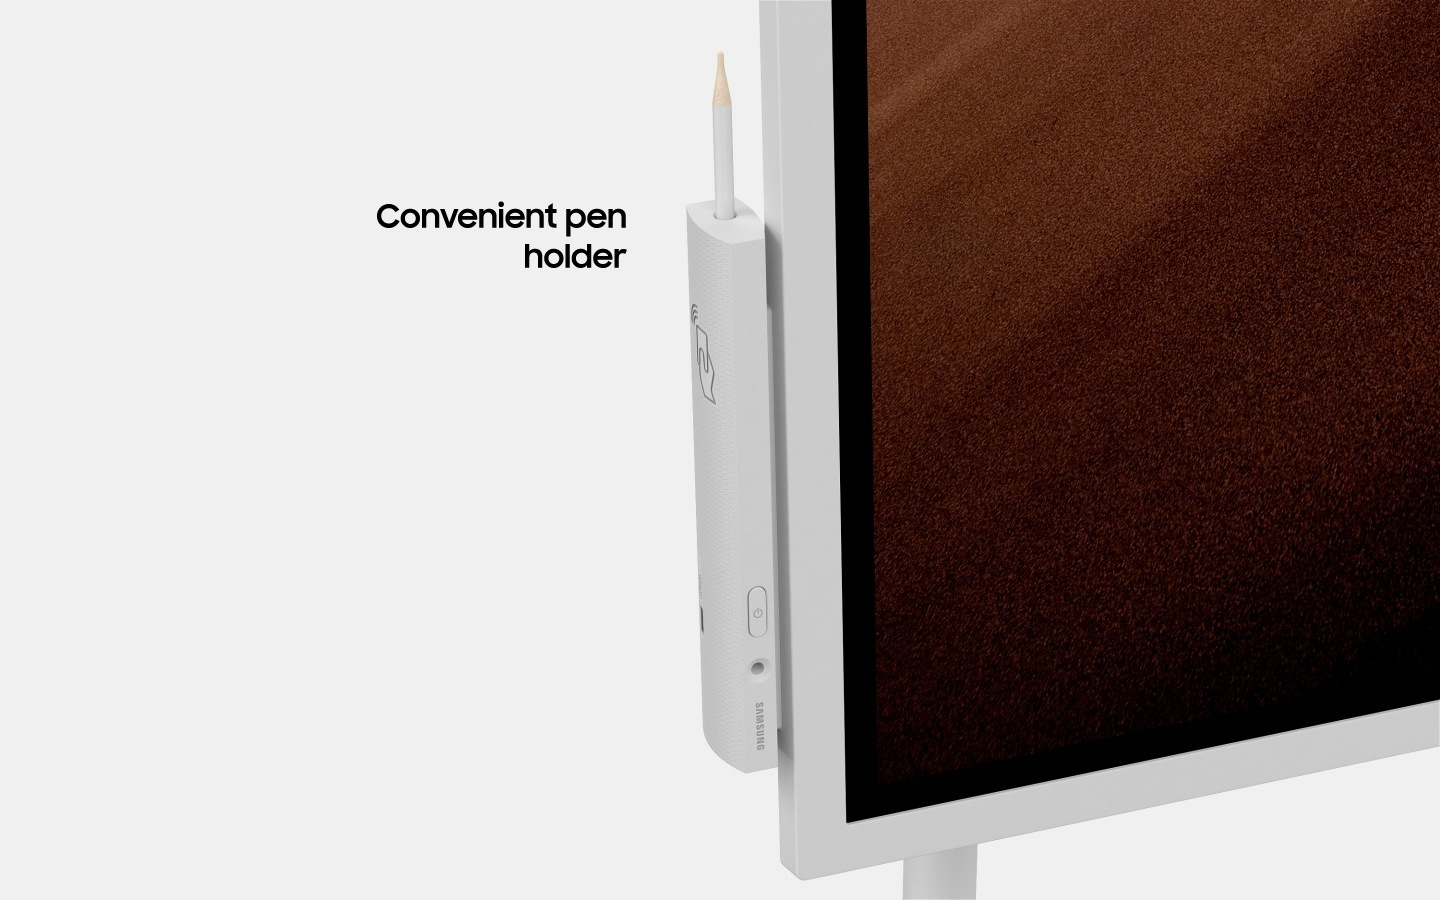 An image showing a magnified image of a Samsung Flip device's pen holder, displaying its NFC tag with text that reads "convenient pen holder"(6-3).